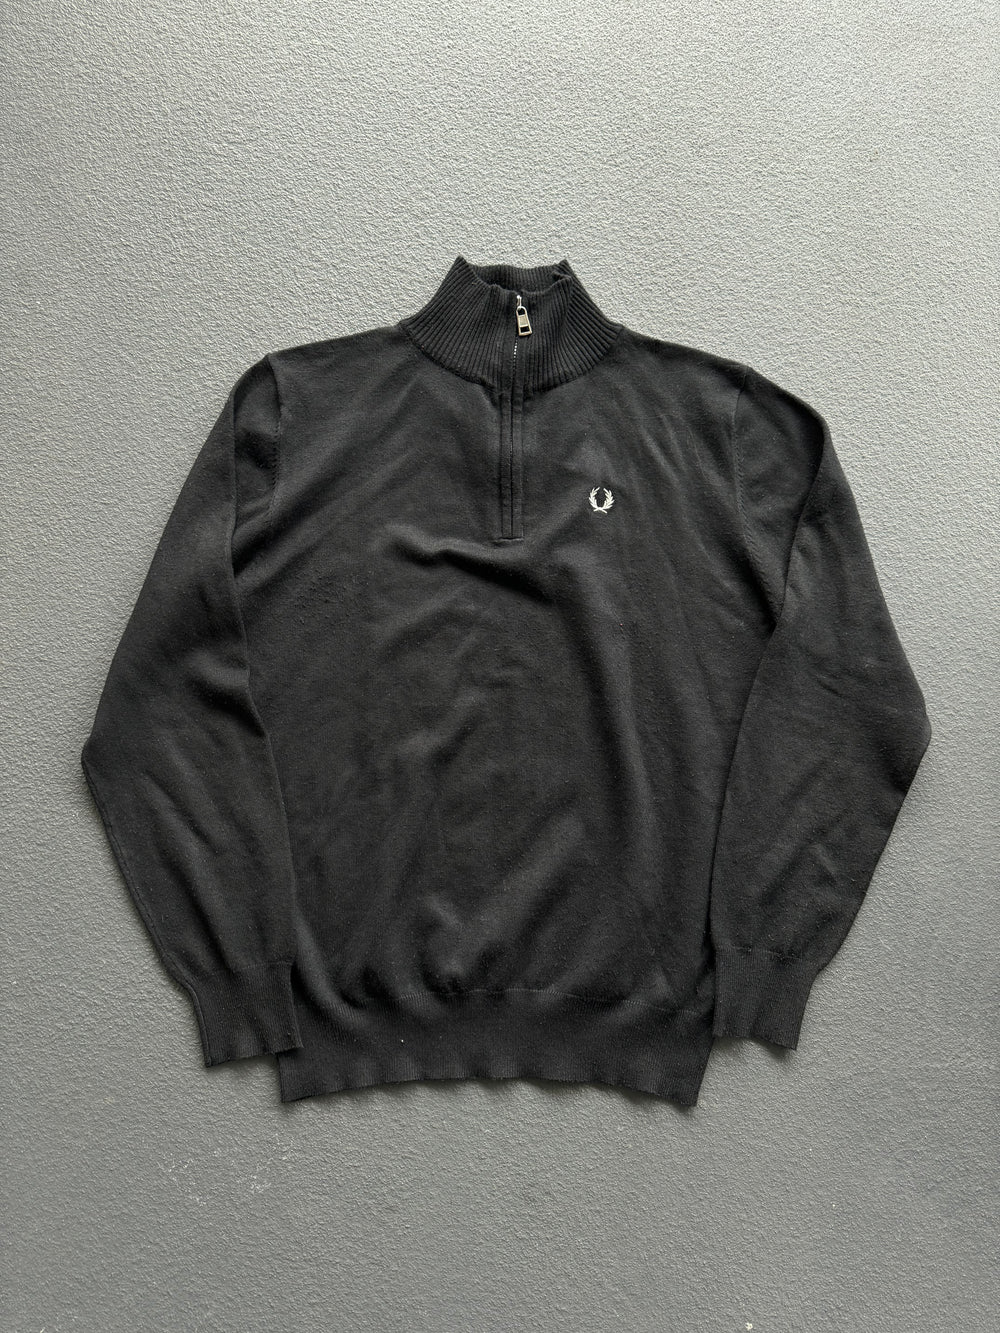 Early 2000s Fred Perry Knit 1/4 Zip Sweater Troyer (M/L)